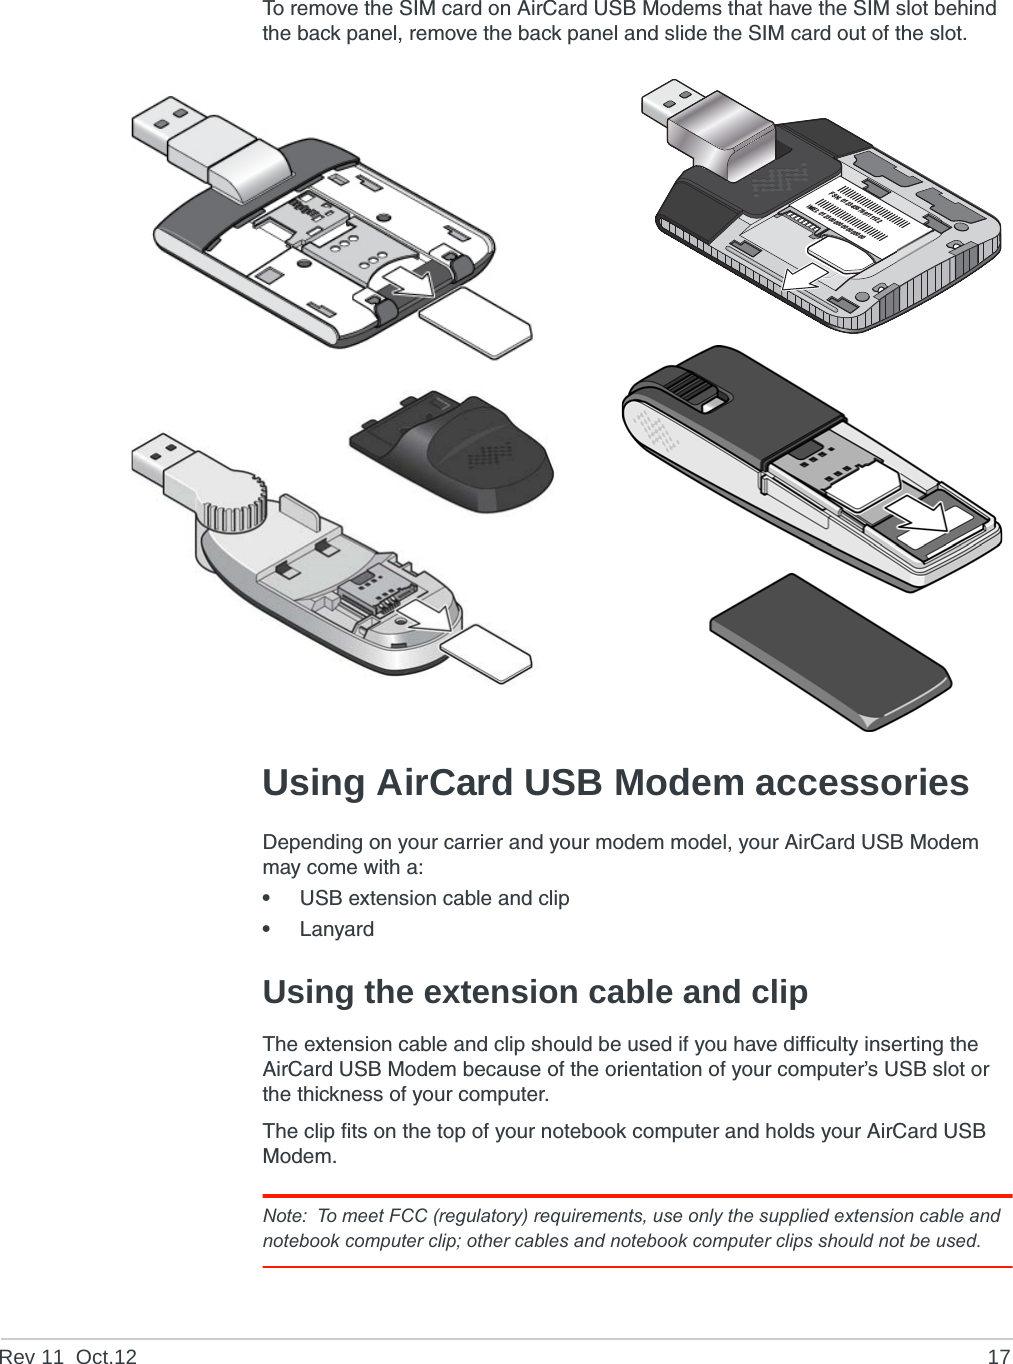 Rev 11  Oct.12 17To remove the SIM card on AirCard USB Modems that have the SIM slot behind the back panel, remove the back panel and slide the SIM card out of the slot.Using AirCard USB Modem accessoriesDepending on your carrier and your modem model, your AirCard USB Modem may come with a:•USB extension cable and clip•LanyardUsing the extension cable and clipThe extension cable and clip should be used if you have difficulty inserting the AirCard USB Modem because of the orientation of your computer’s USB slot or the thickness of your computer.The clip fits on the top of your notebook computer and holds your AirCard USB Modem.Note: To meet FCC (regulatory) requirements, use only the supplied extension cable and notebook computer clip; other cables and notebook computer clips should not be used. FSN: 0123456789111122IMEI: 012300000000000000